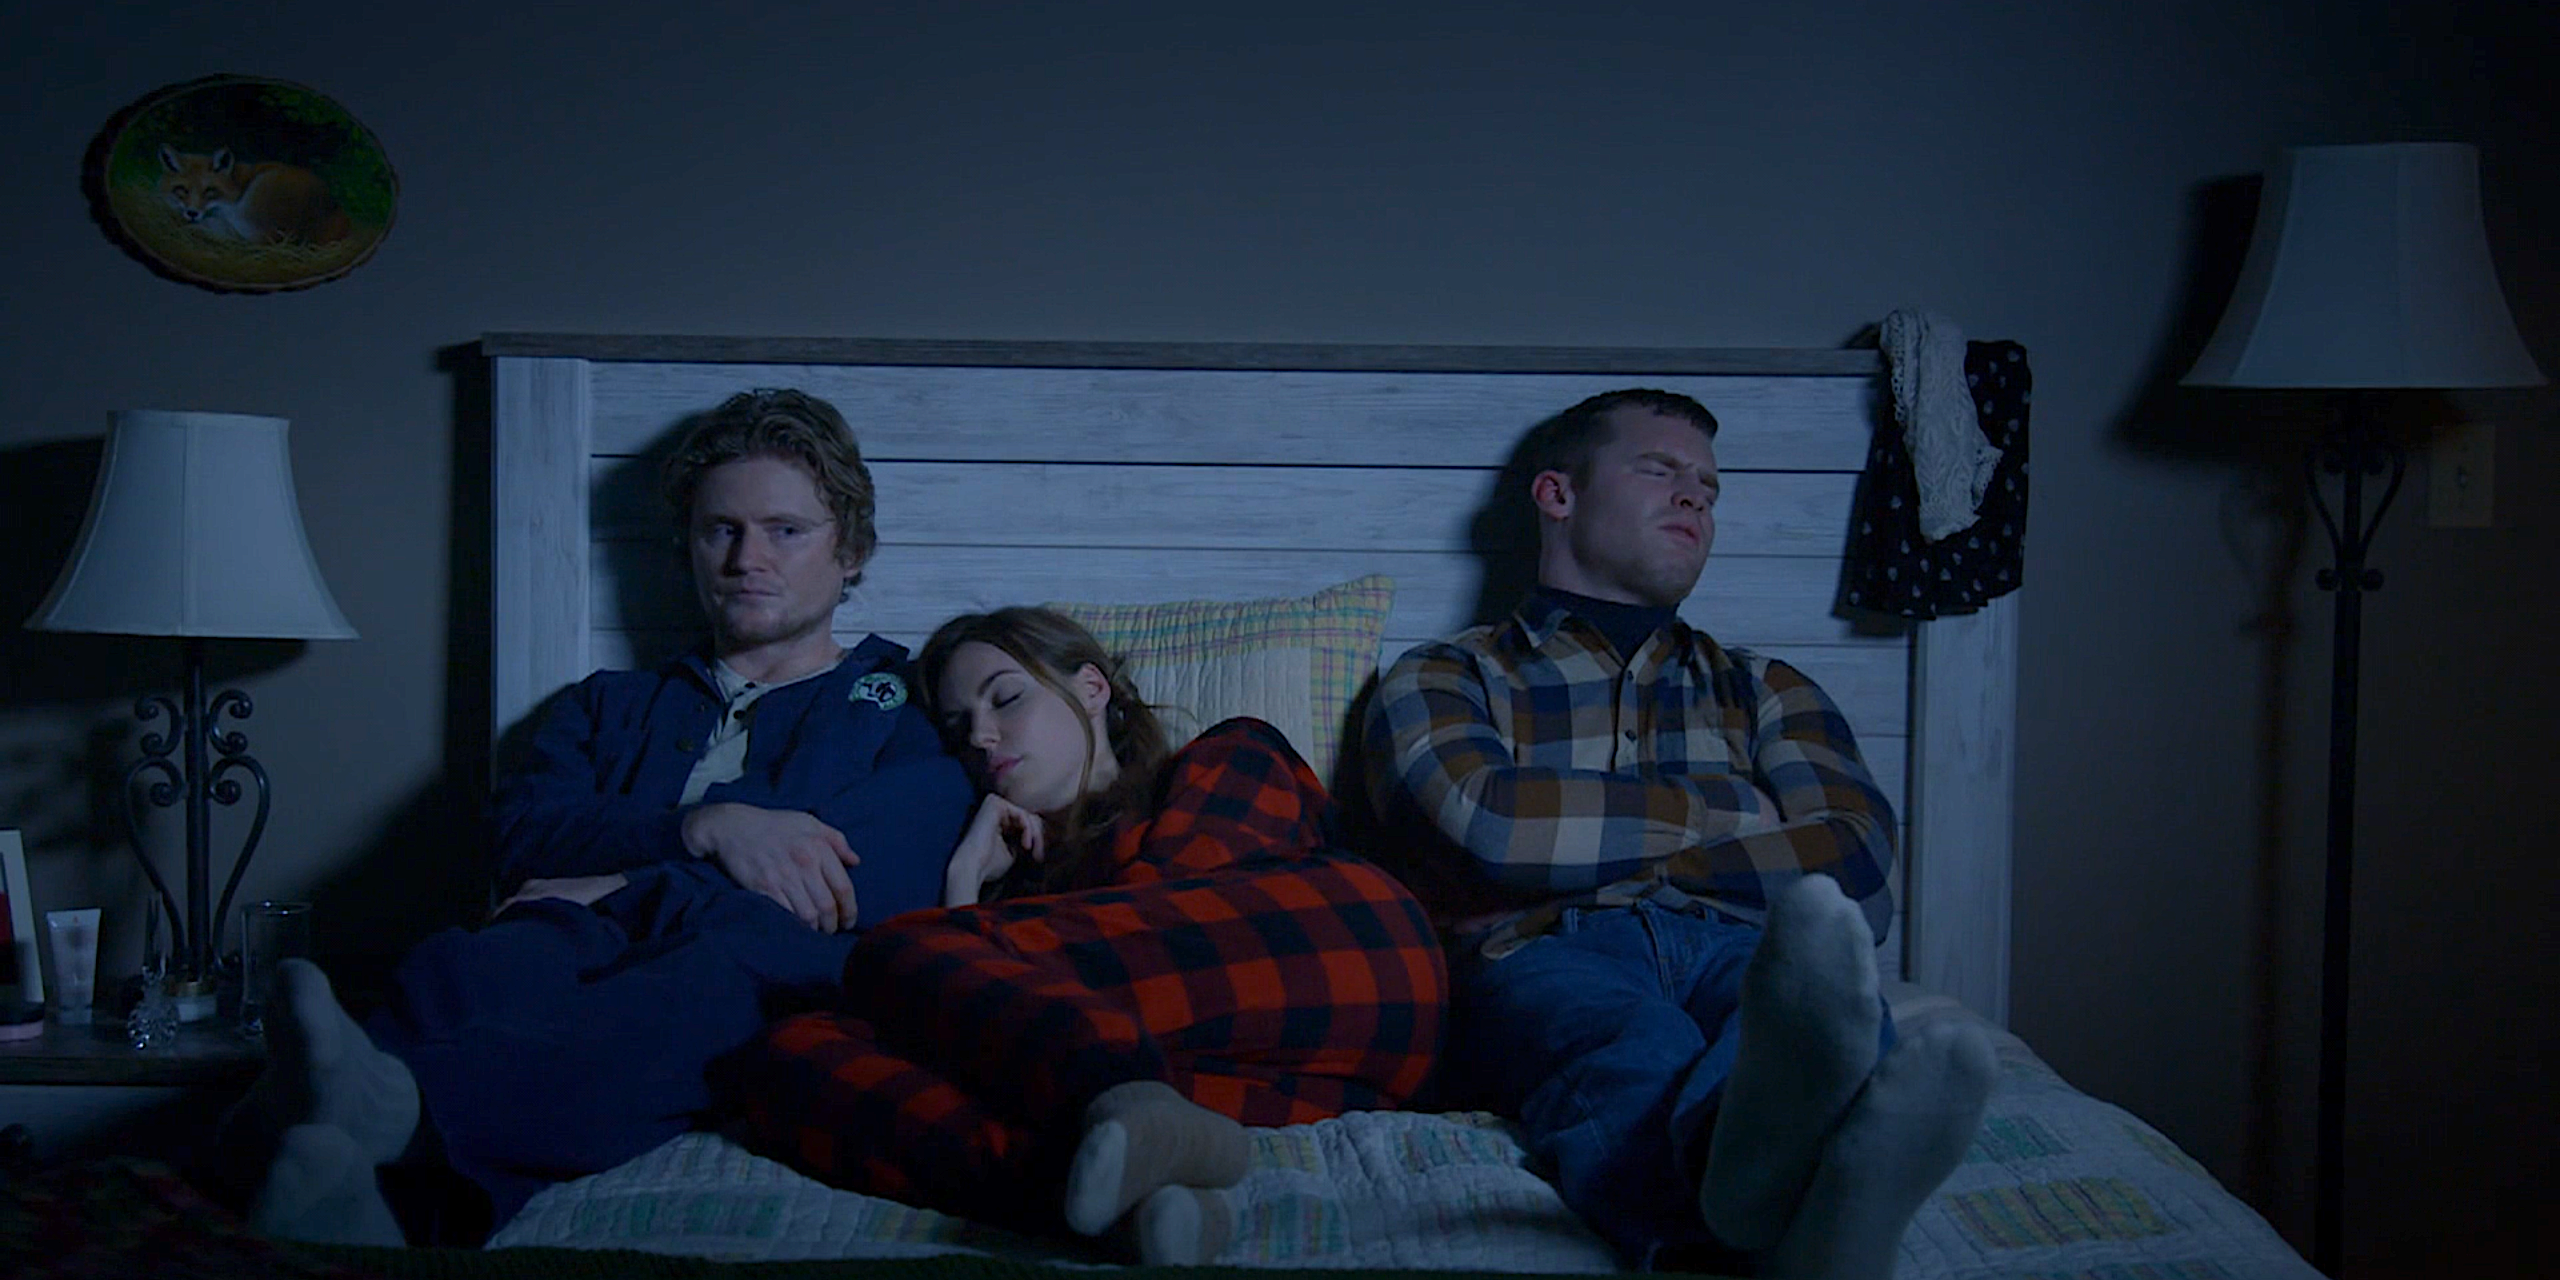 Daryl, Katy and Wayne all lying in bed at a sleepover